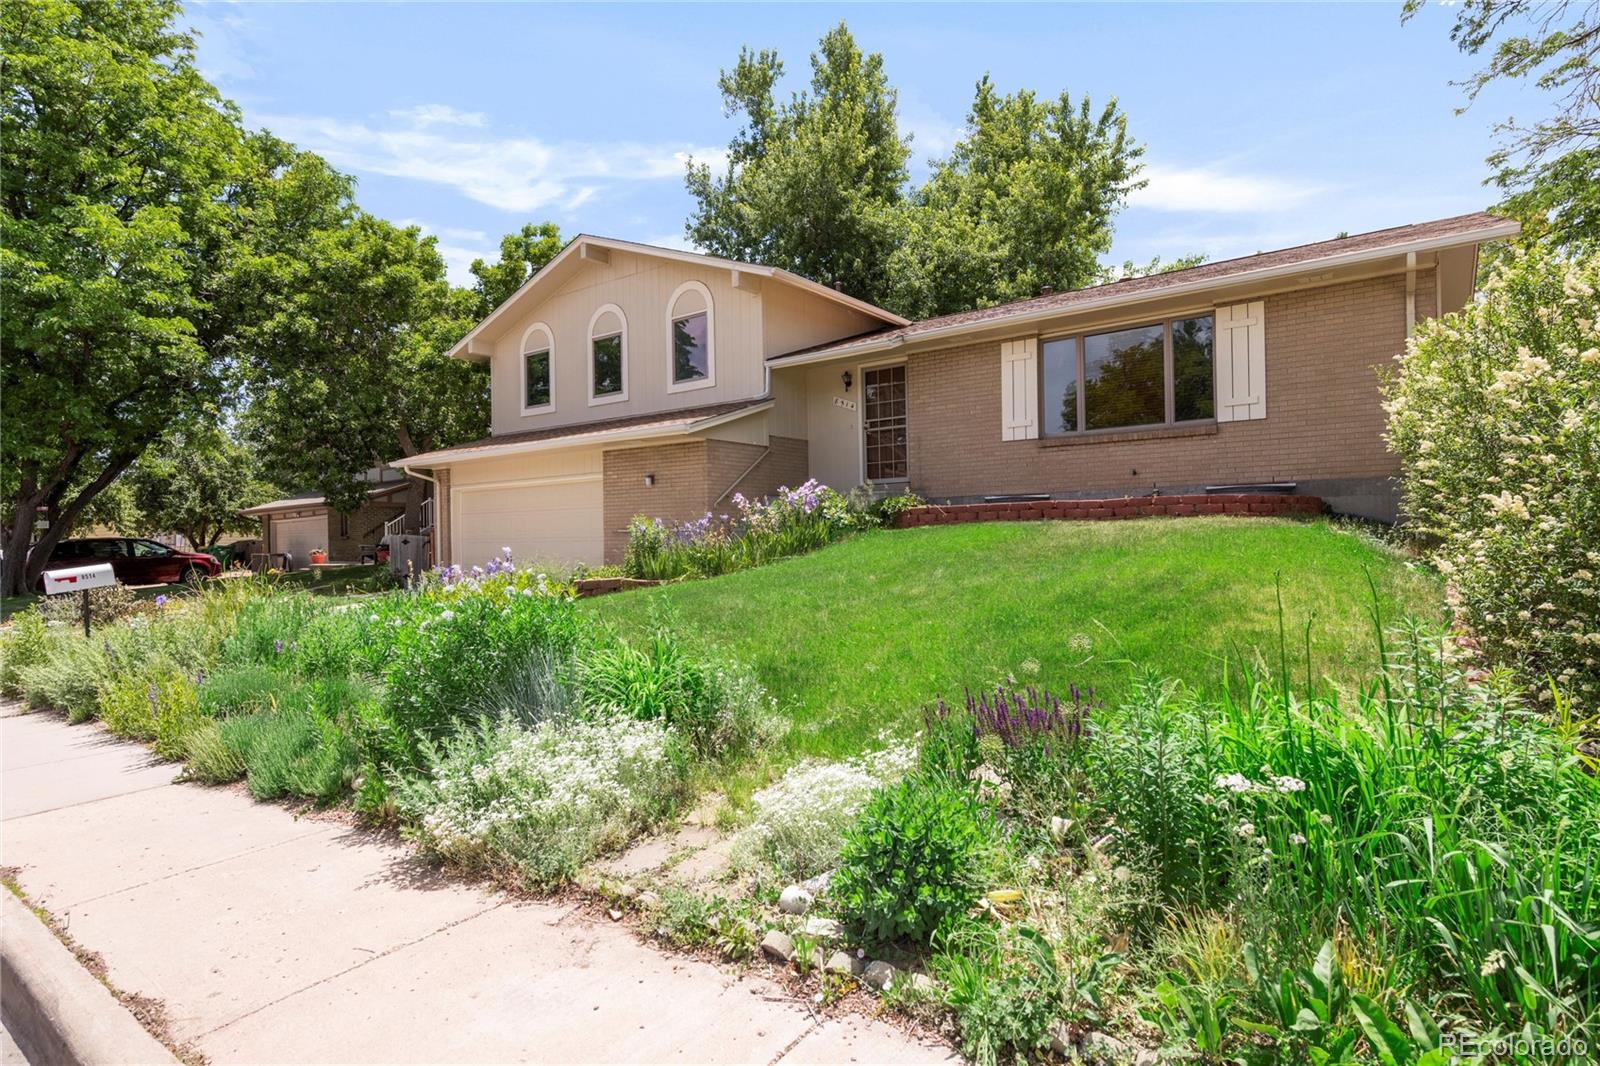 Report Image for 8514  W Center Avenue ,Lakewood, Colorado